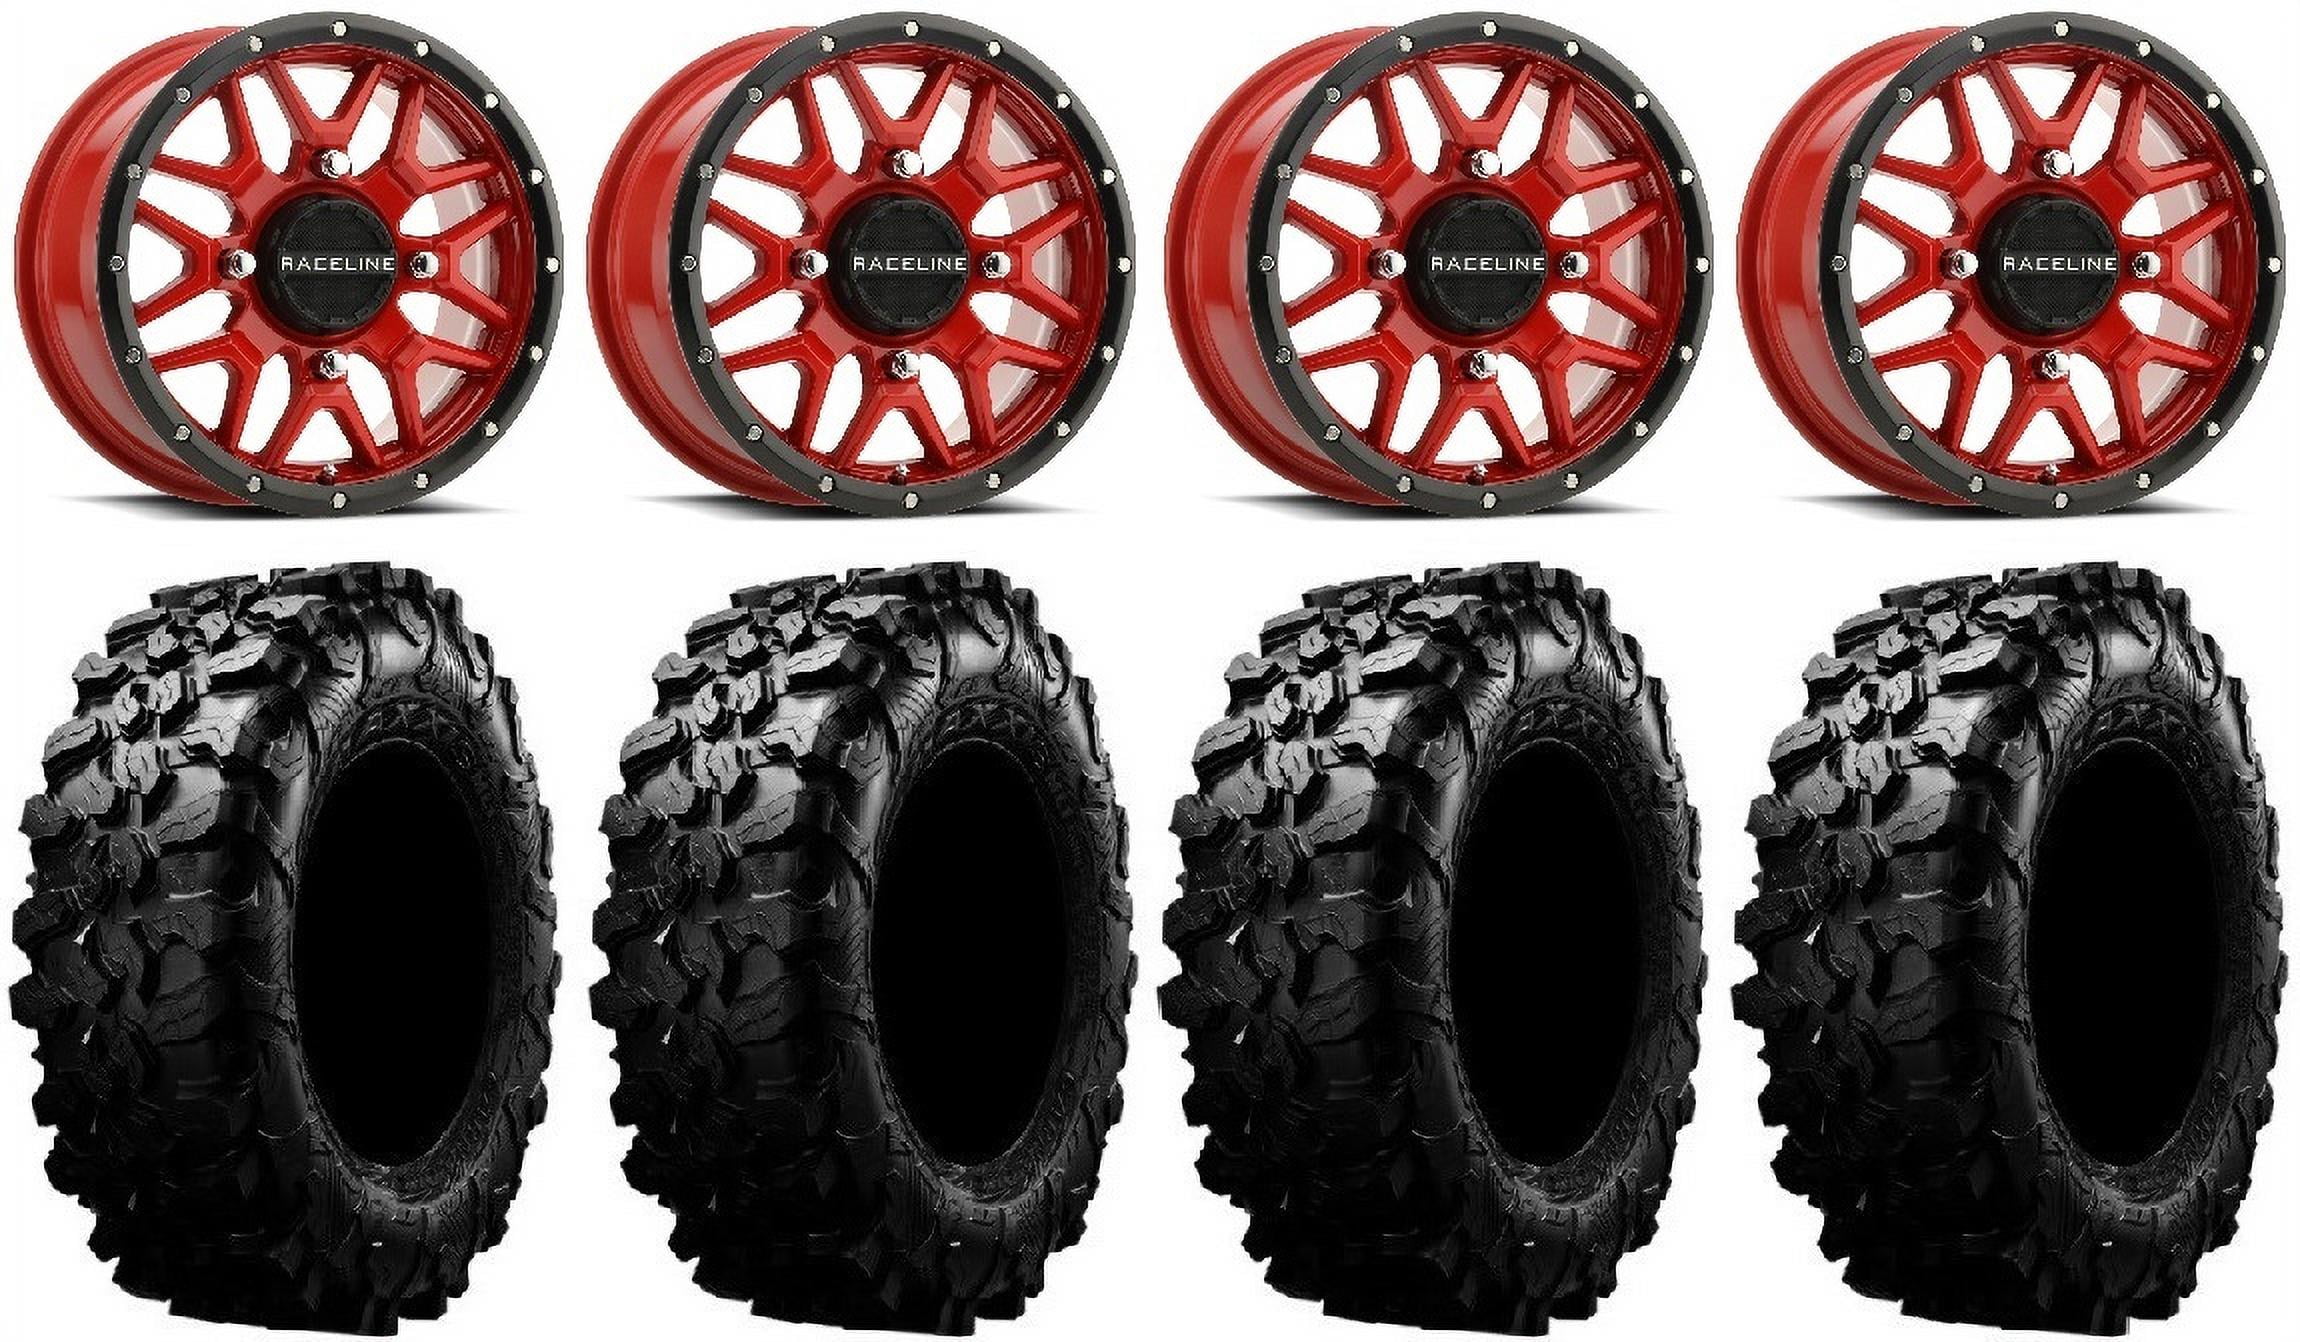 ATV Tires 30x10-14 4 8ply Full set of Maxxis Carnivore Radial 